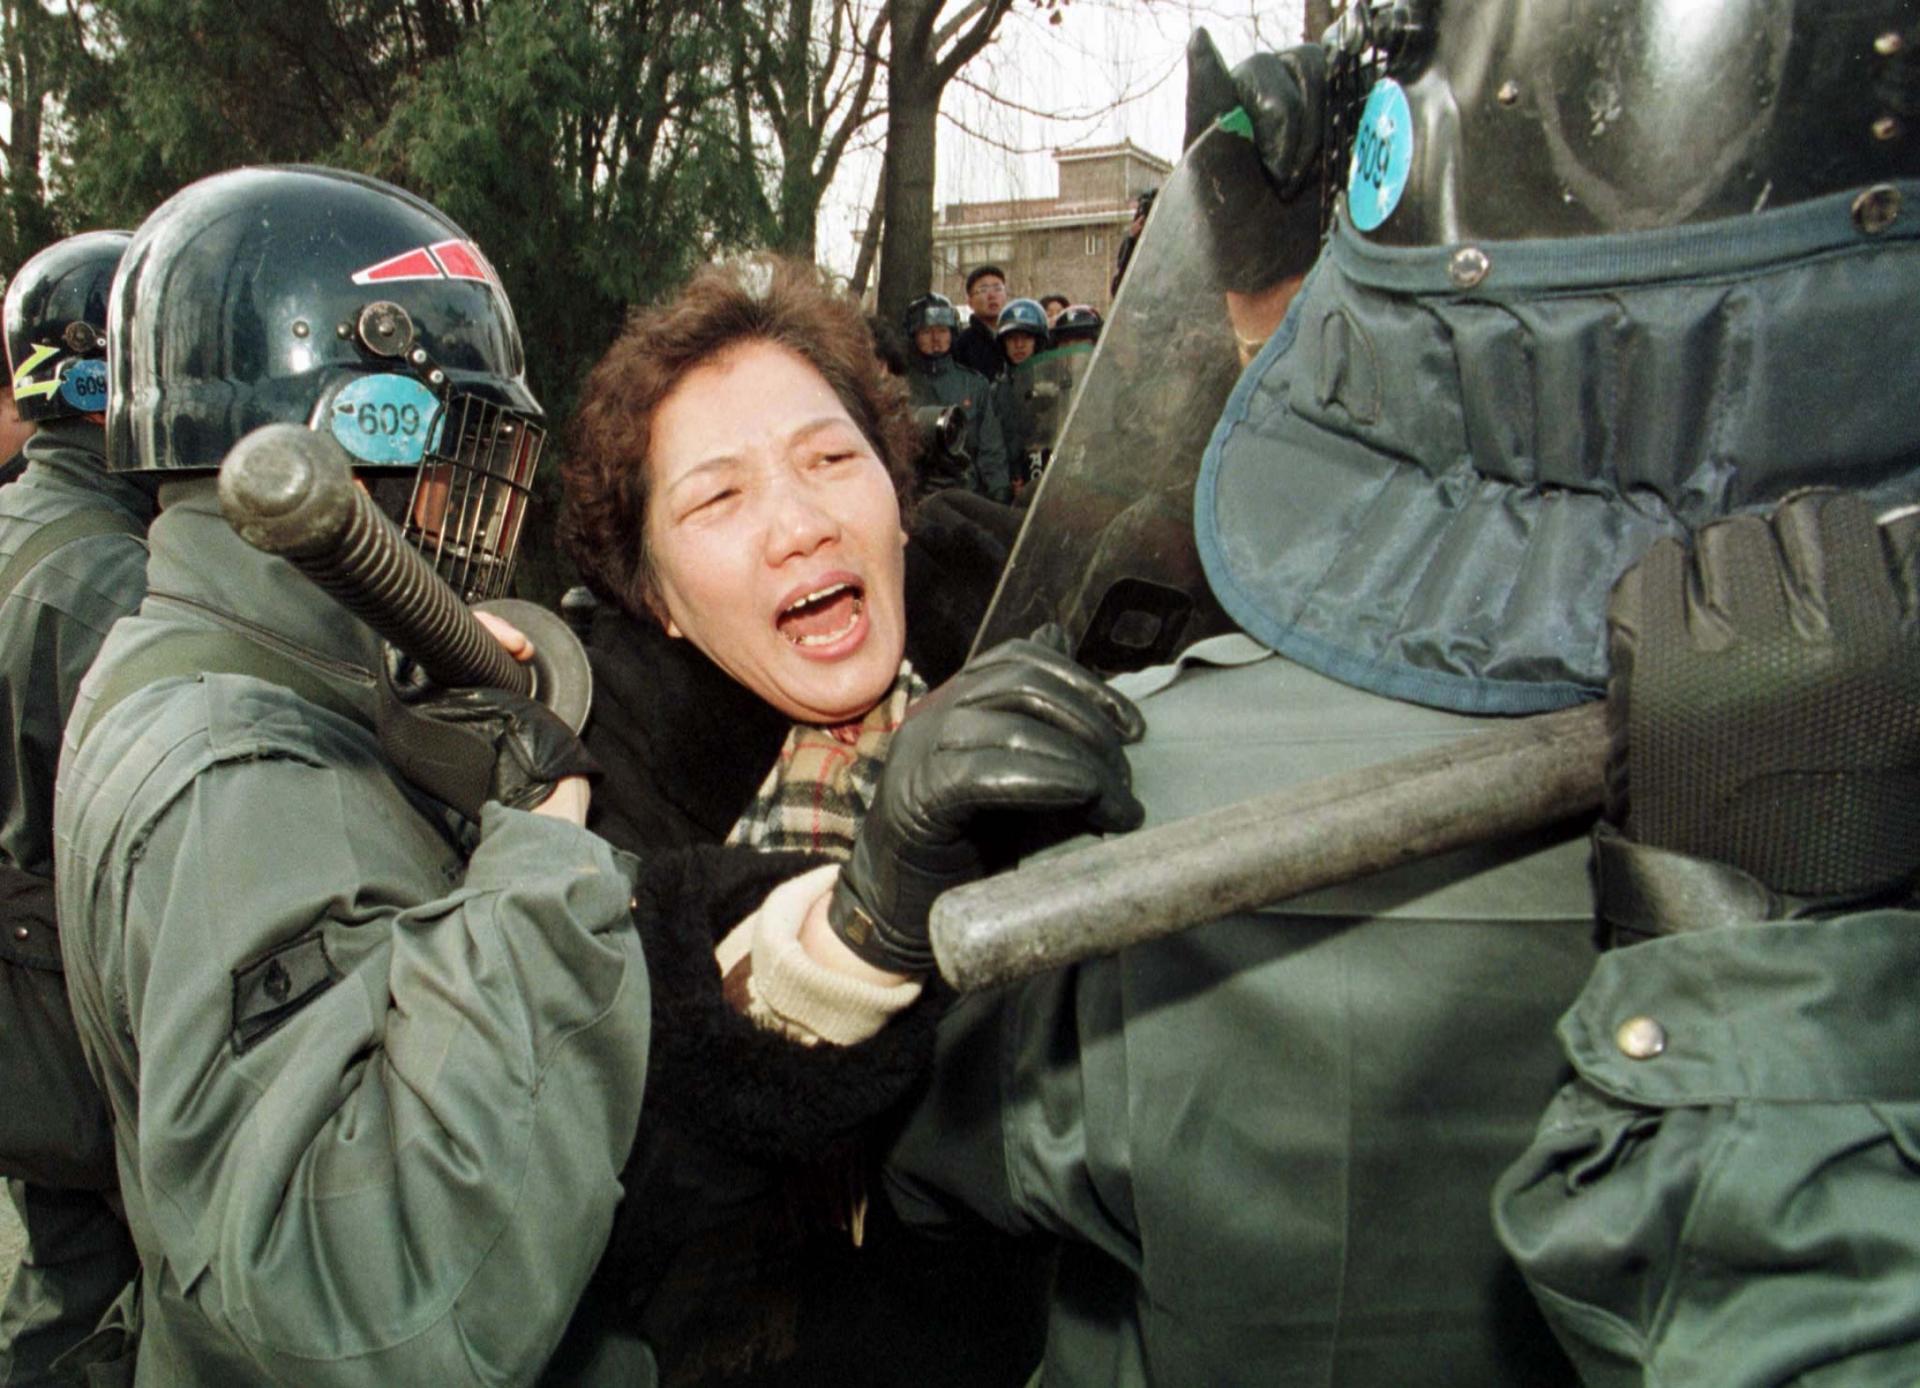 A woman protester cries out amid riot police in green uniforms. 